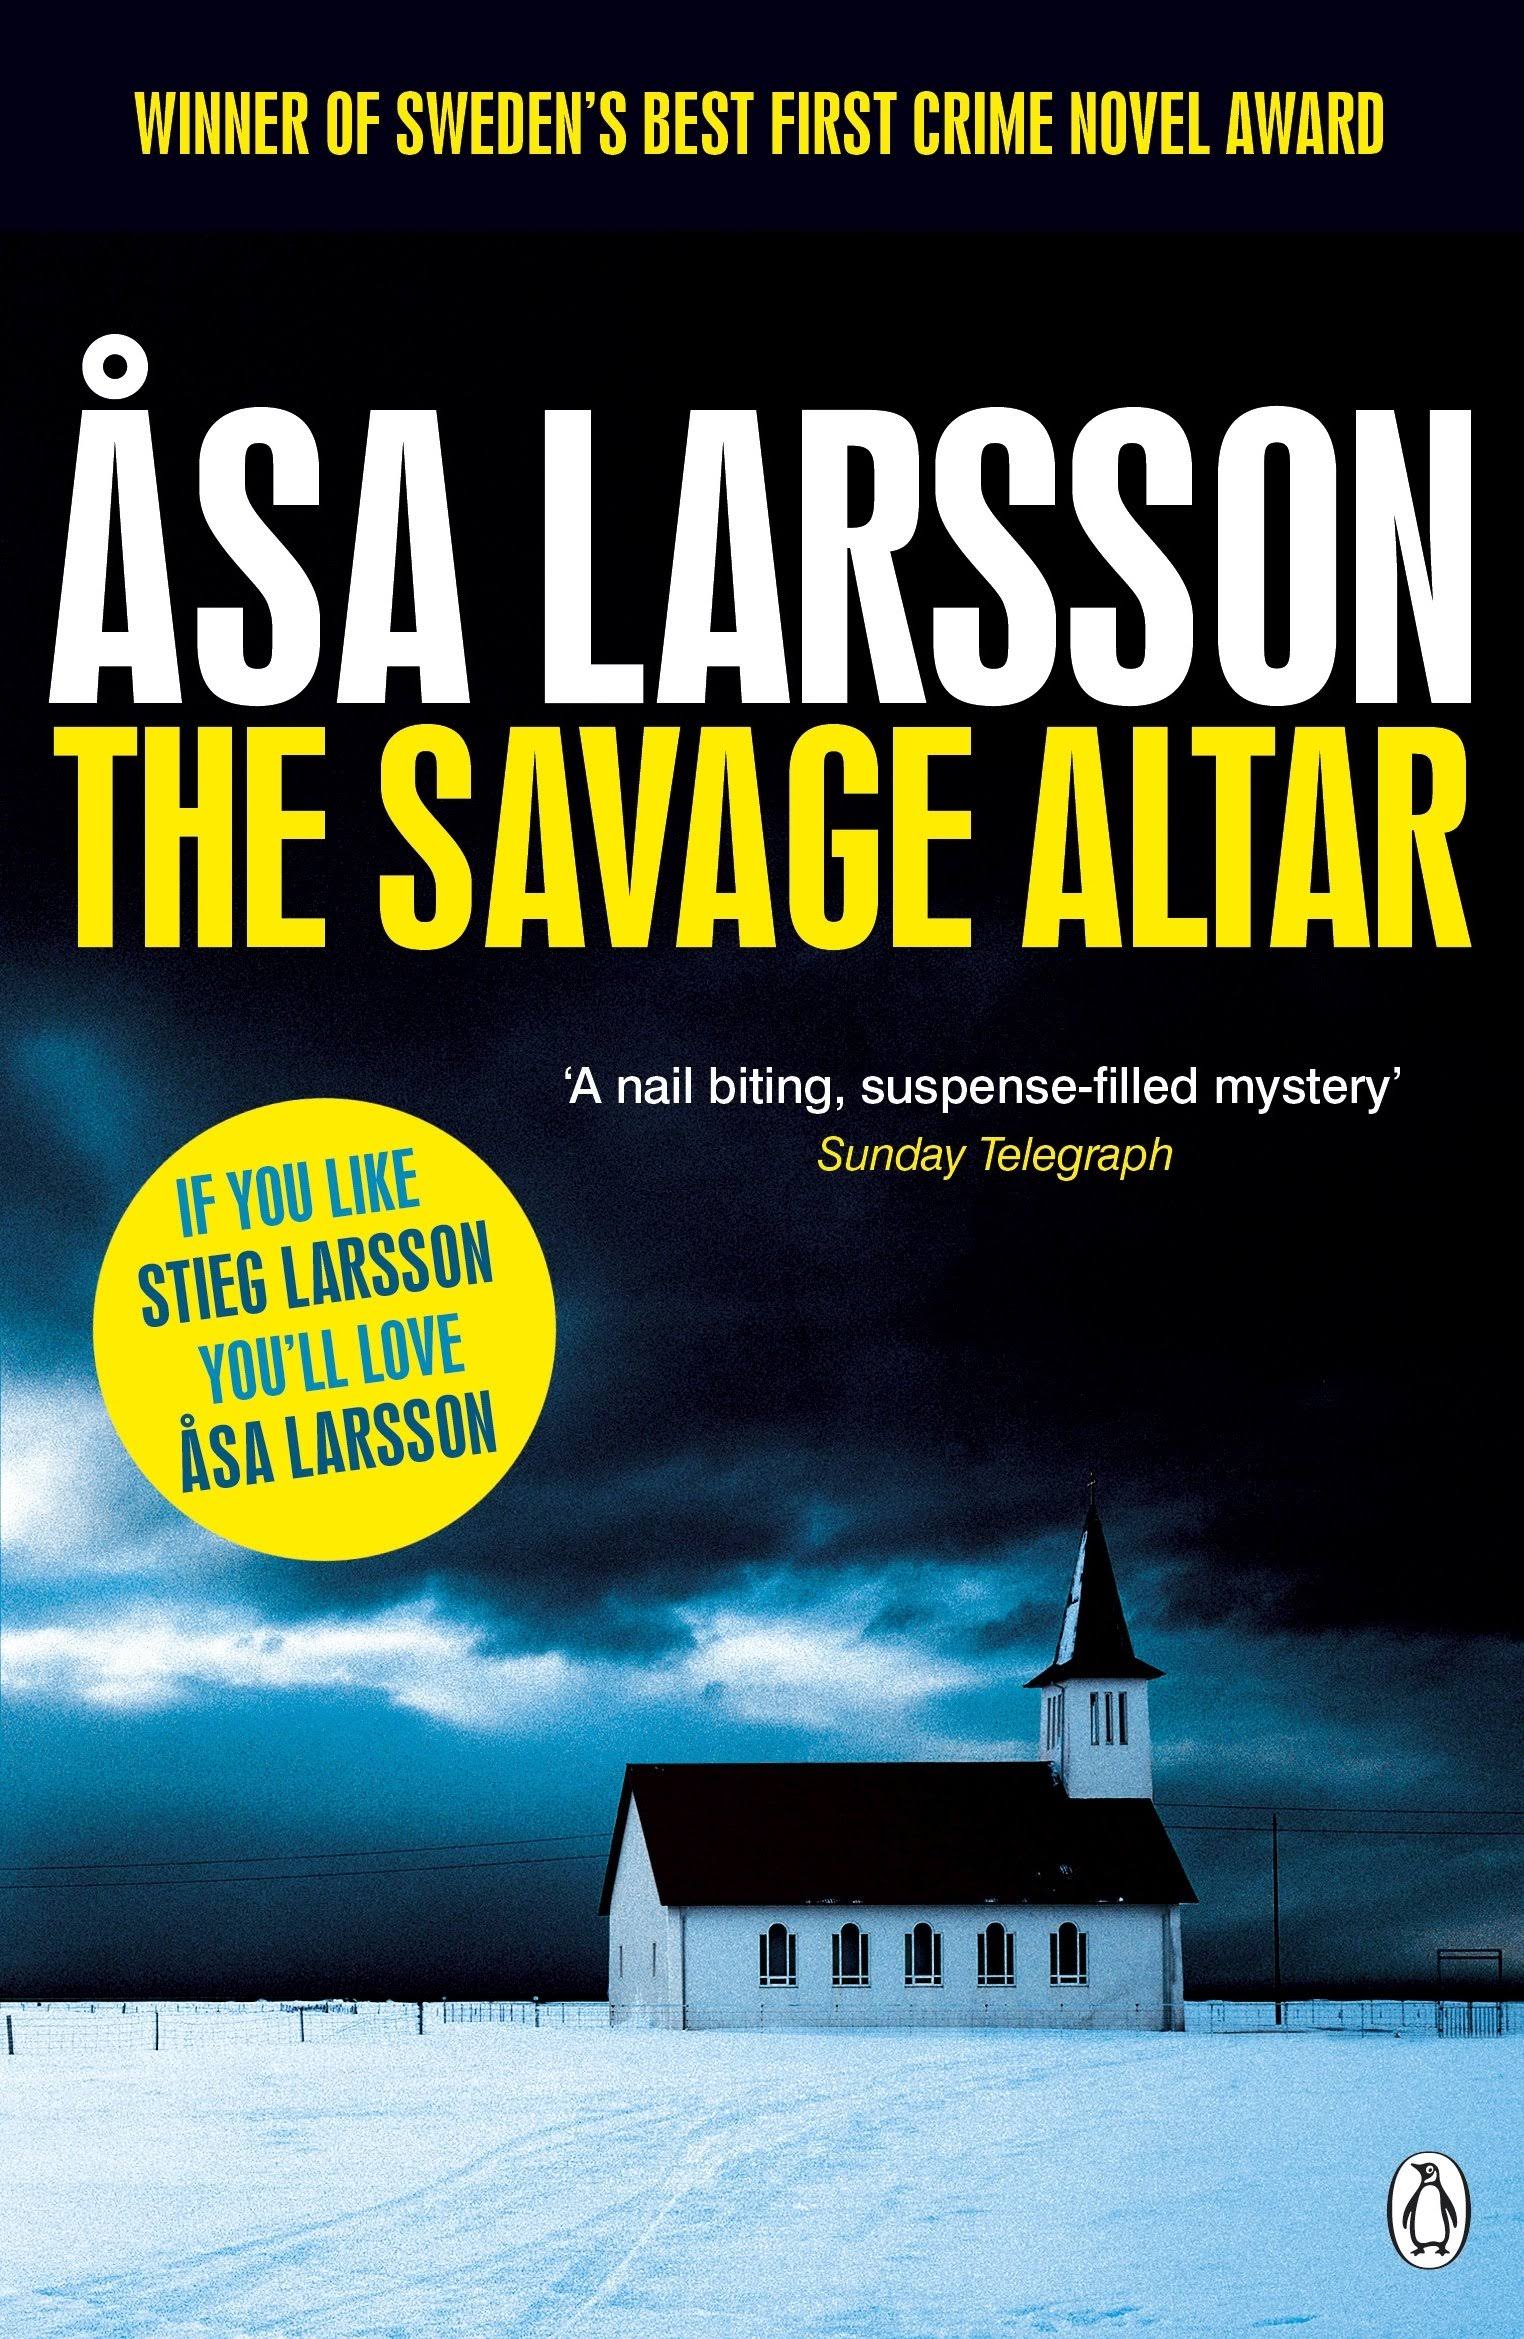 The Savage Altar by ASA Larsson